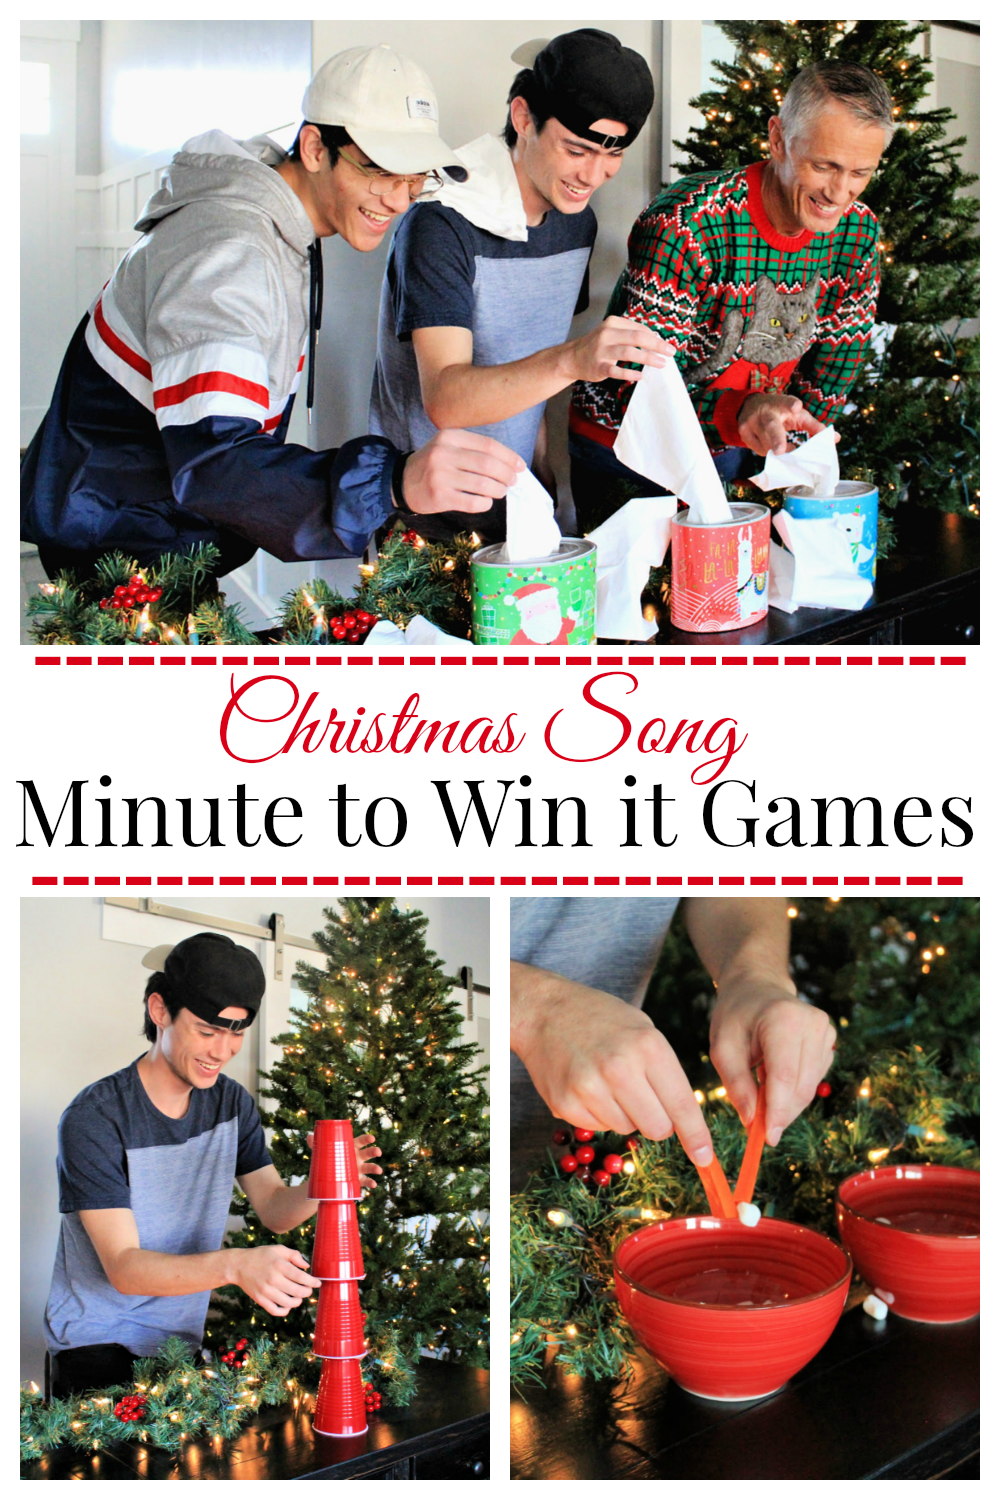 Christmas Minute to Win it Games! These fun Christmas song minute to win it games are a blast to play. Such fun and simple Christmas party games. #christmasgames #christmaspartygames #minutetowinitgames #oneminutegames #simplechristmasgames